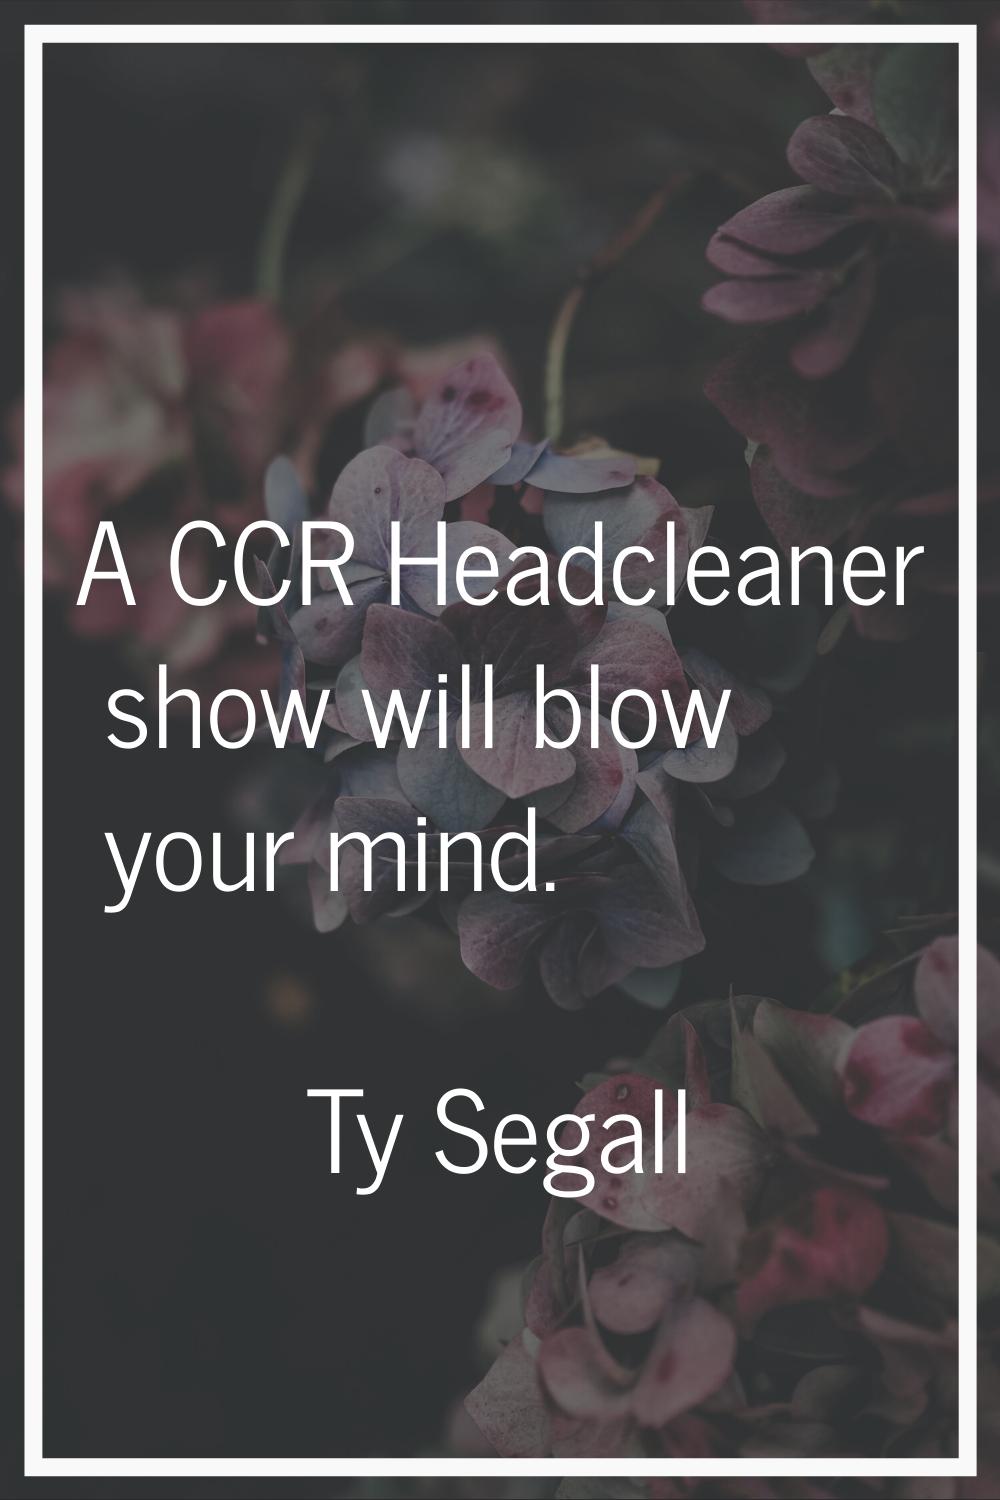 A CCR Headcleaner show will blow your mind.